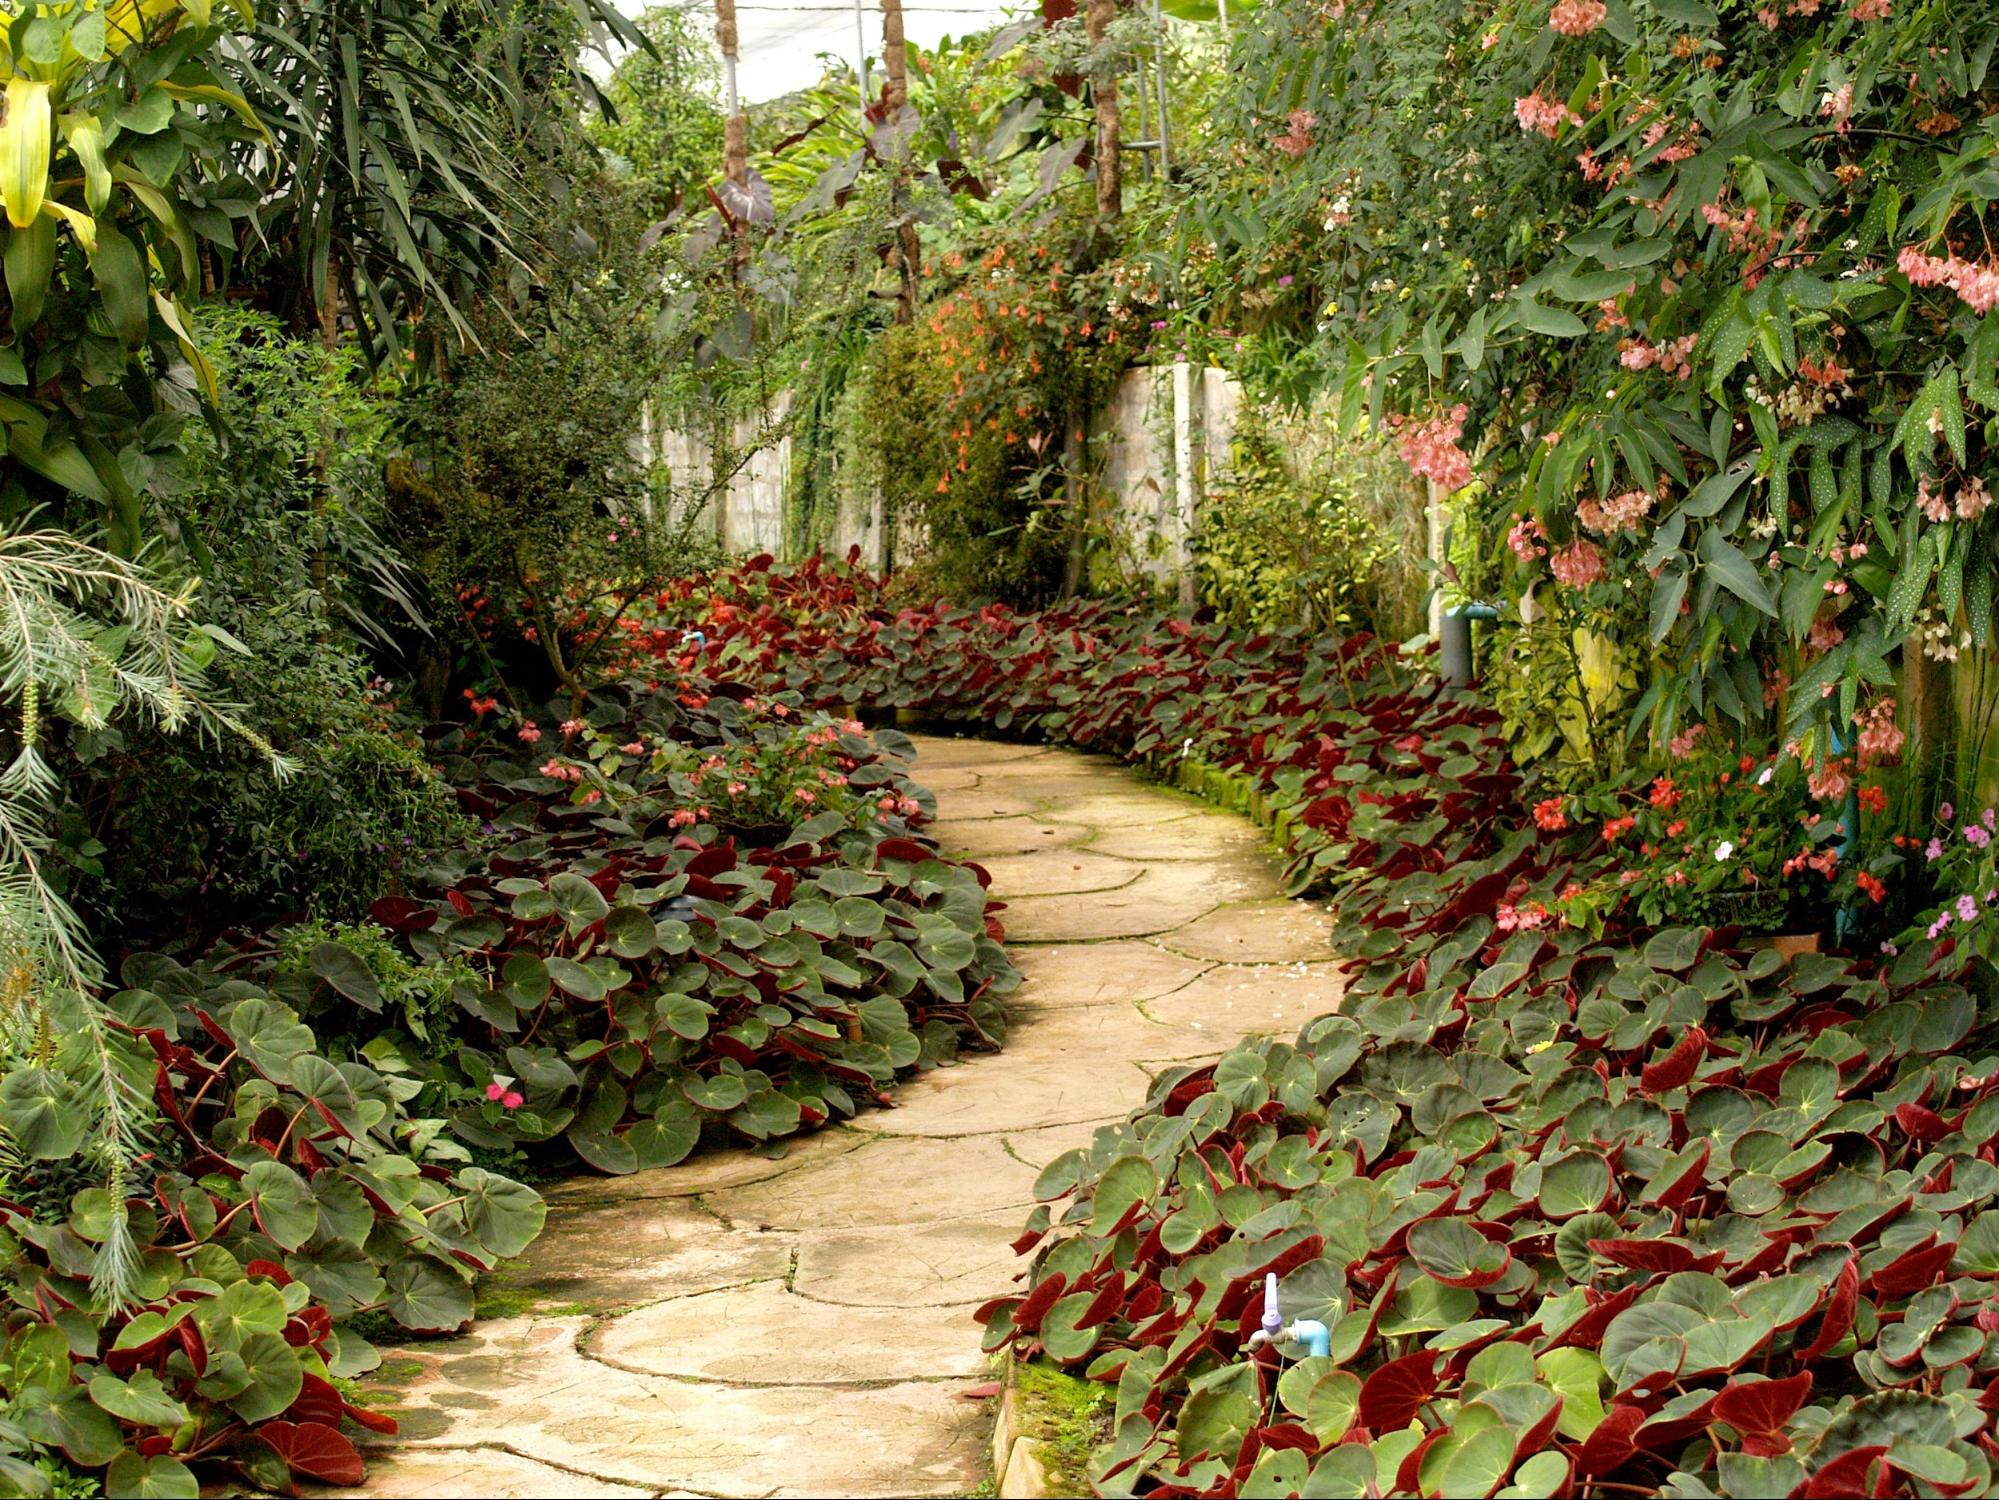 How much does landscaping and gardening cost in Sydney